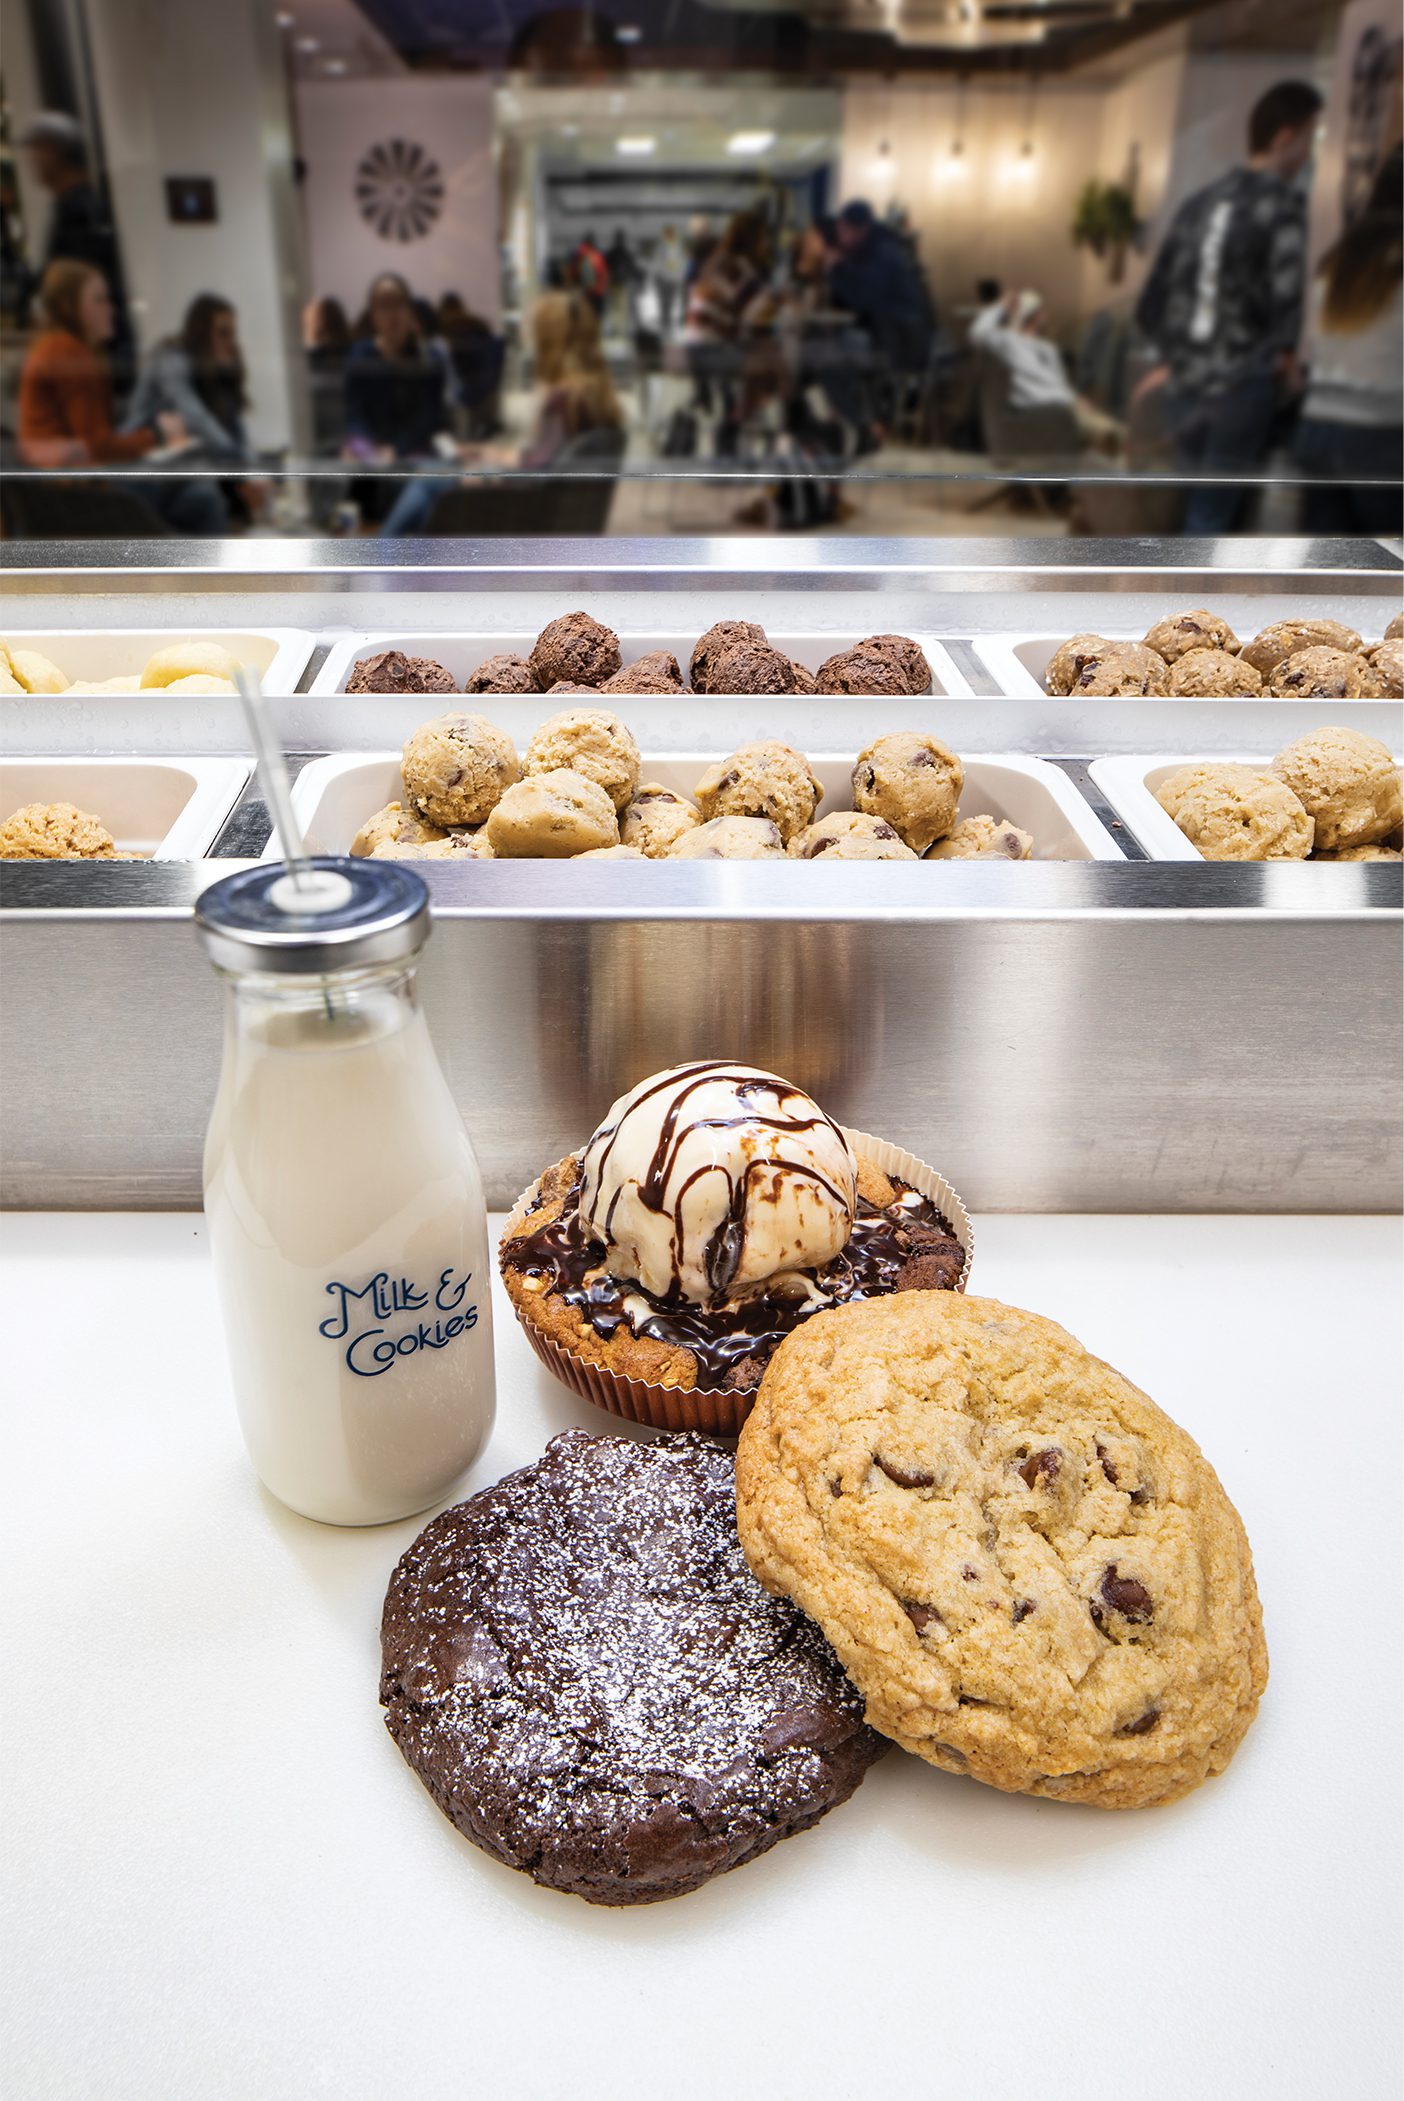 A jar of milk sits on a counter alongside two large cookies and a Cosmookie.